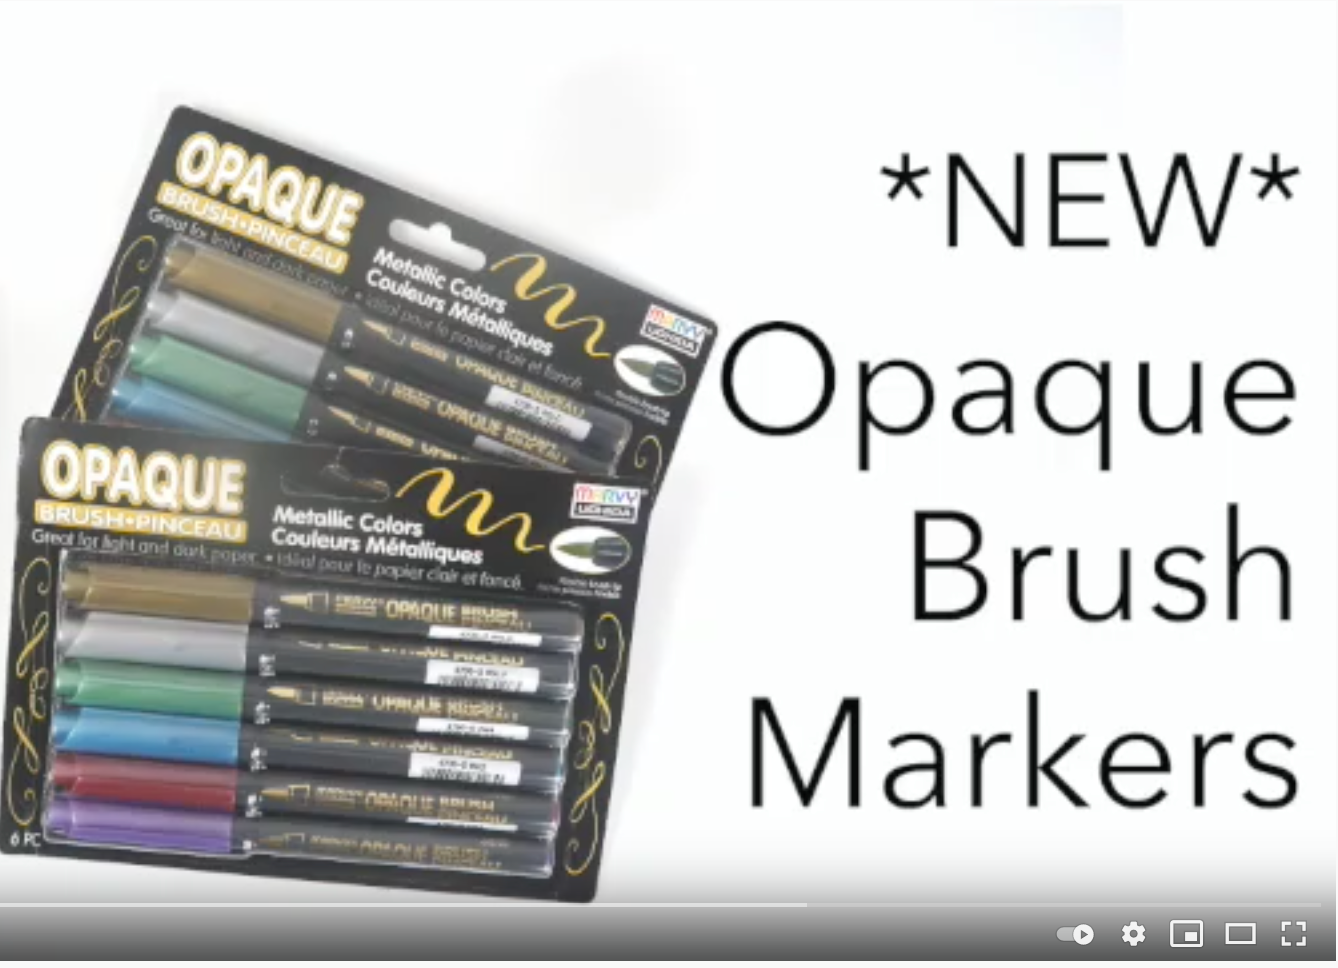 Opaque Brush Markers